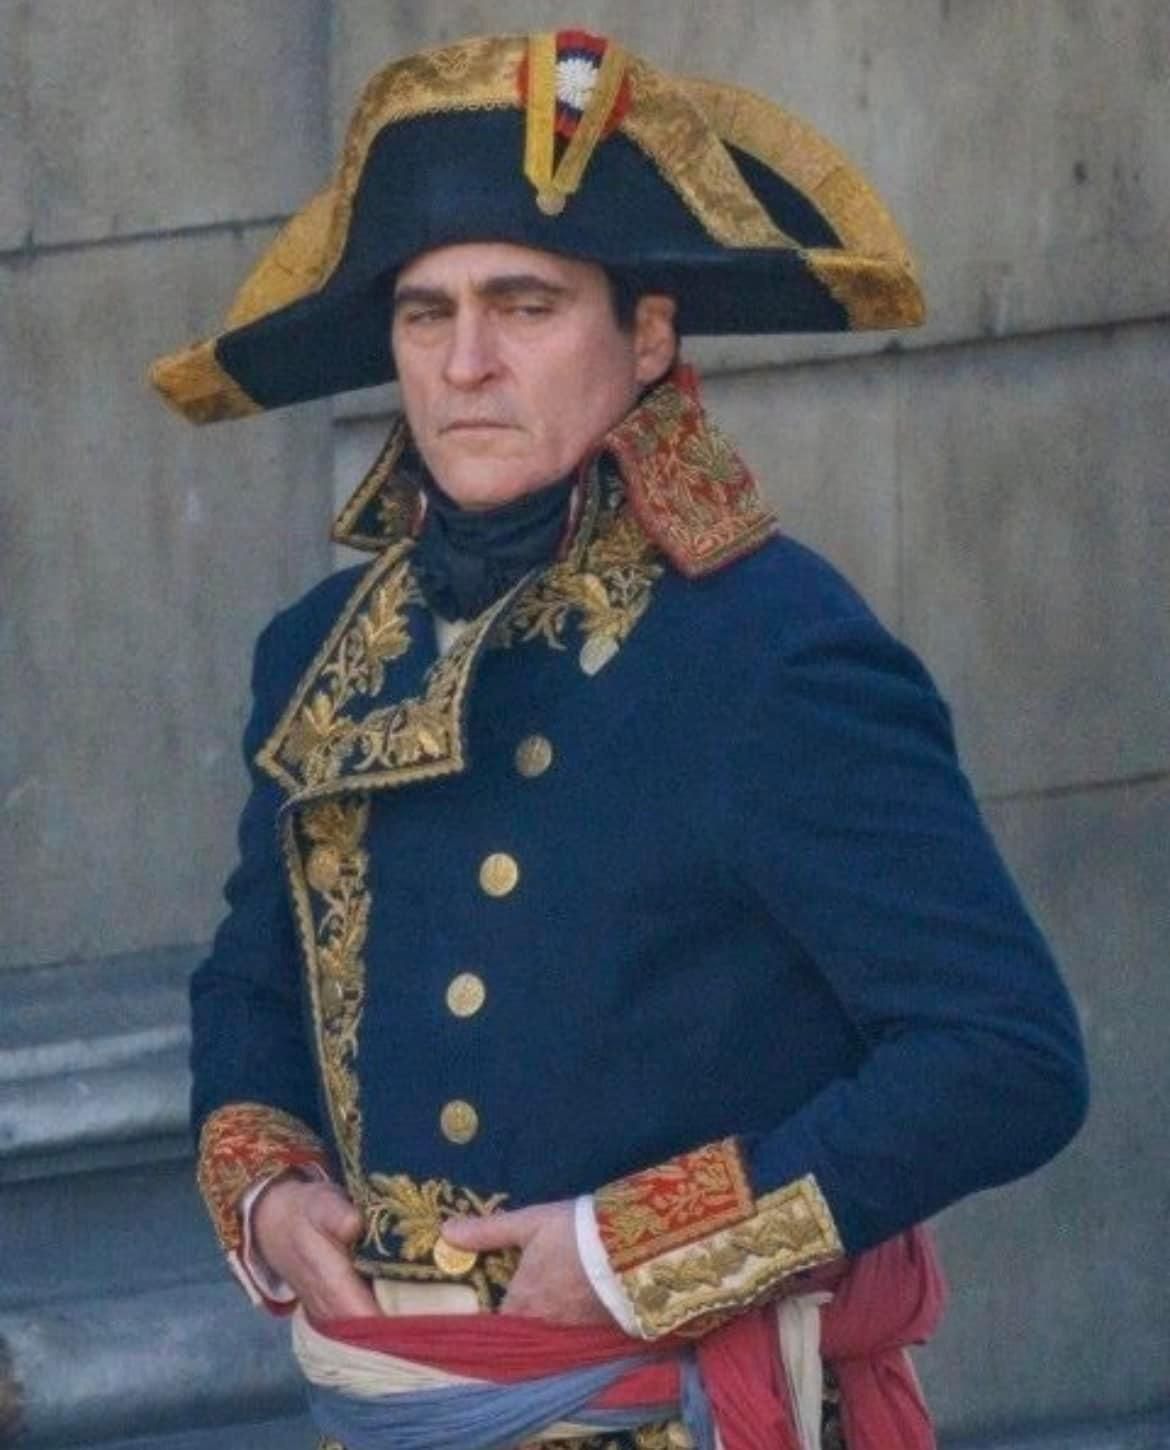 Excited for the Cap’n Crunch biopic.